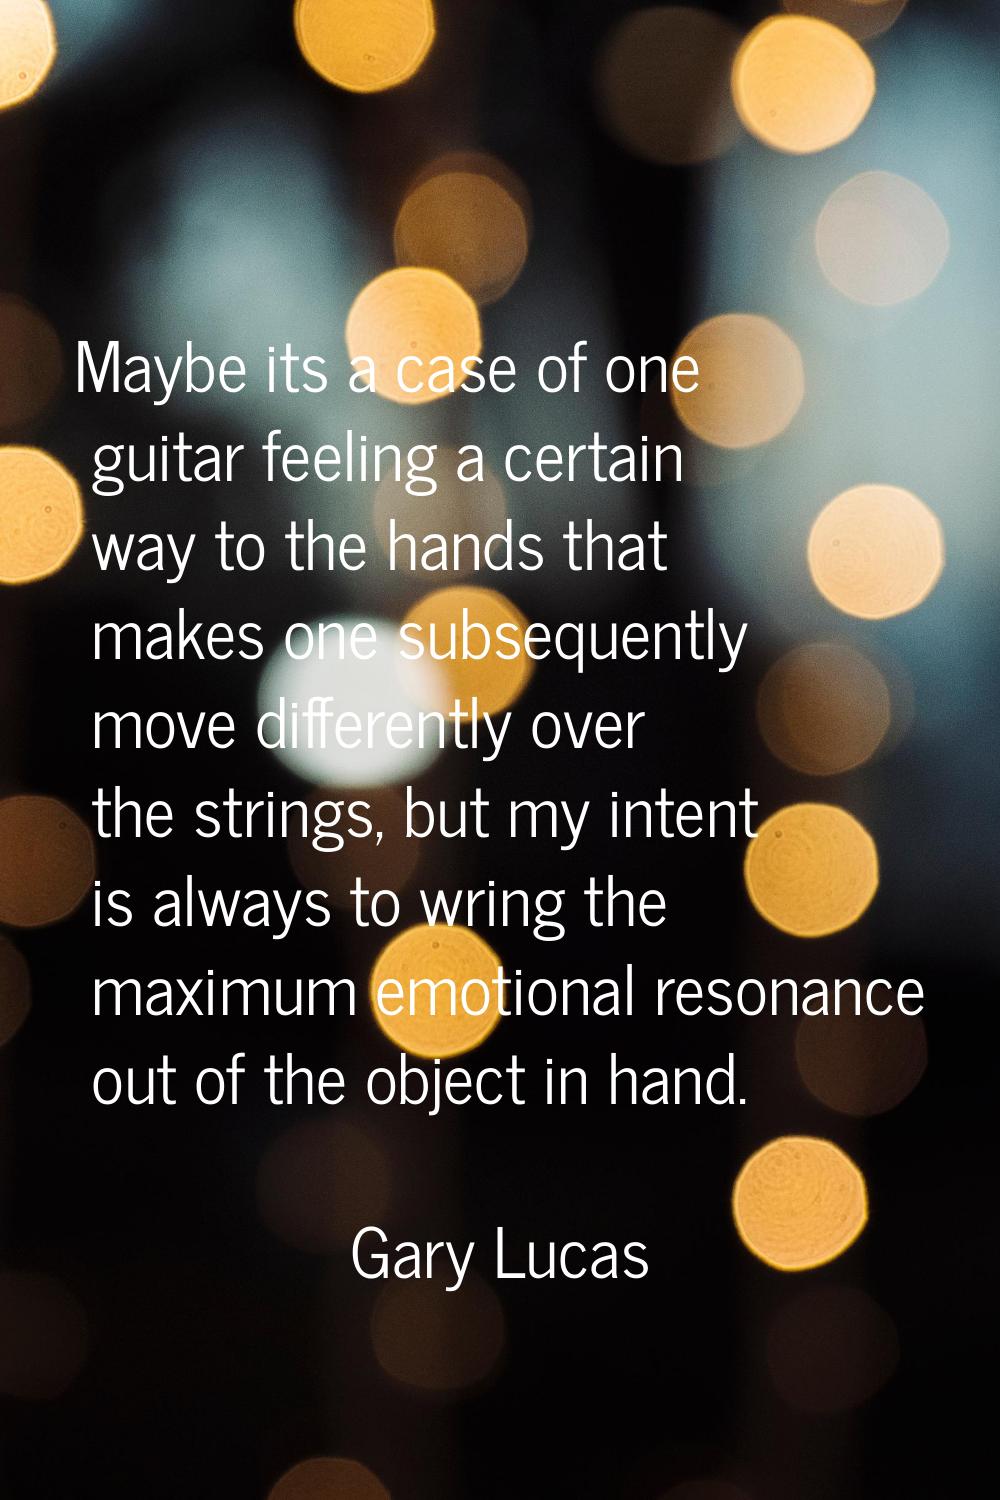 Maybe its a case of one guitar feeling a certain way to the hands that makes one subsequently move 